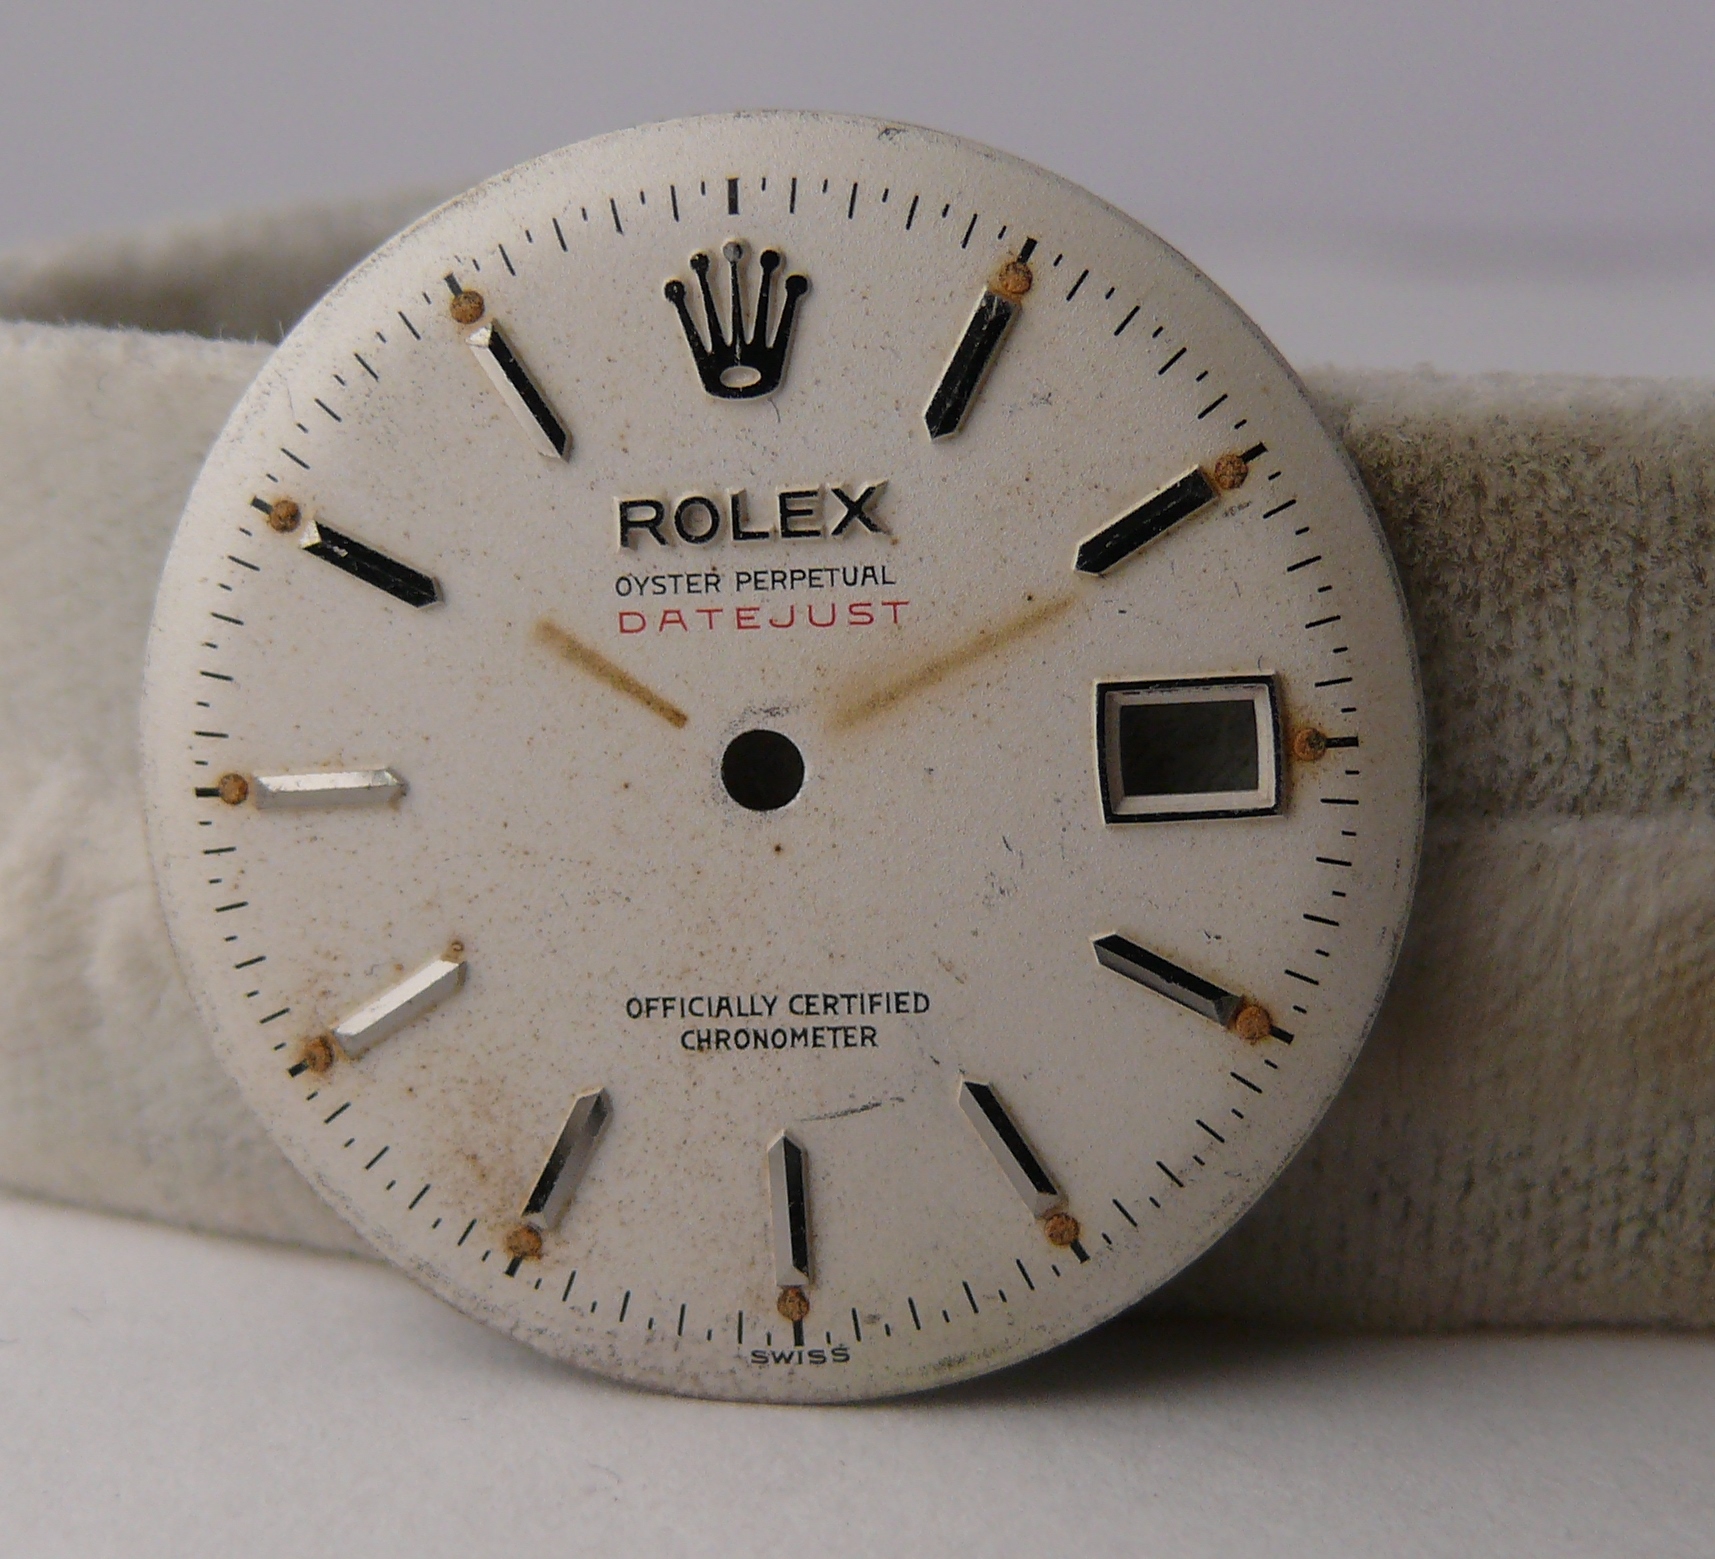 1950s Vintage Rolex Datejust Ovettone Bubbleback 6305 Dial. Please note the dial is completely - Image 2 of 5